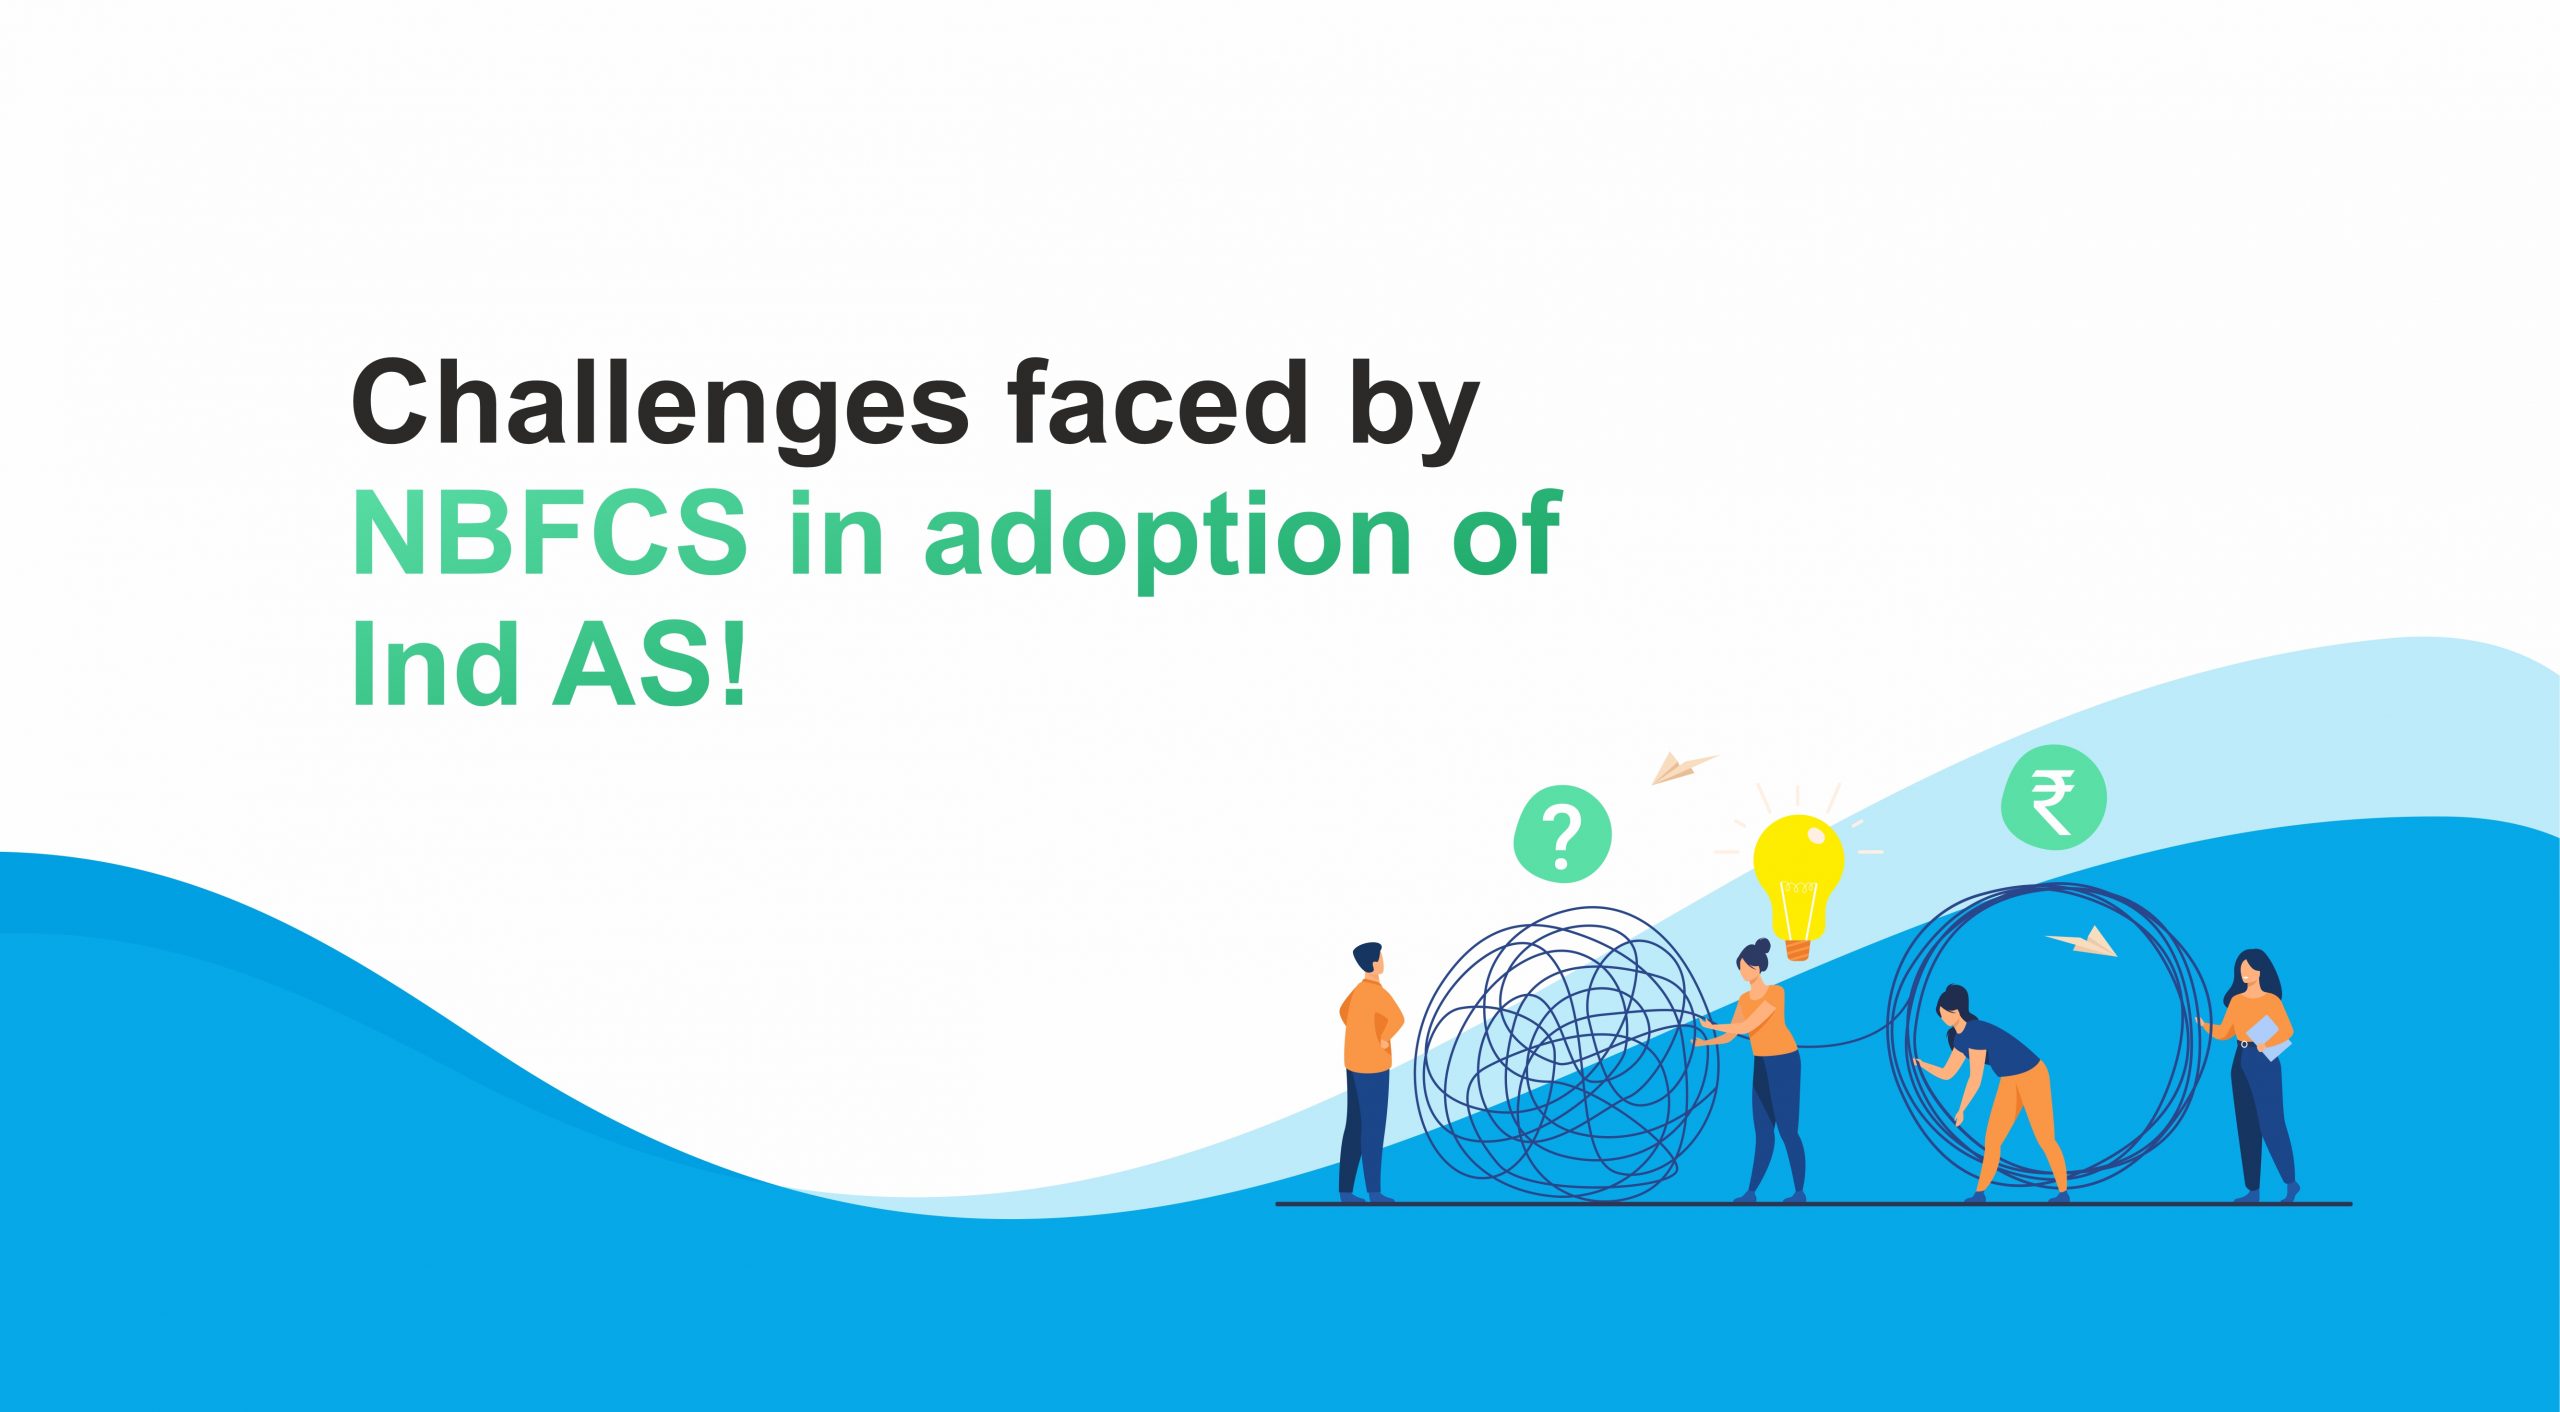 Challenges faced by NBFCs in the Adoption of Ind AS